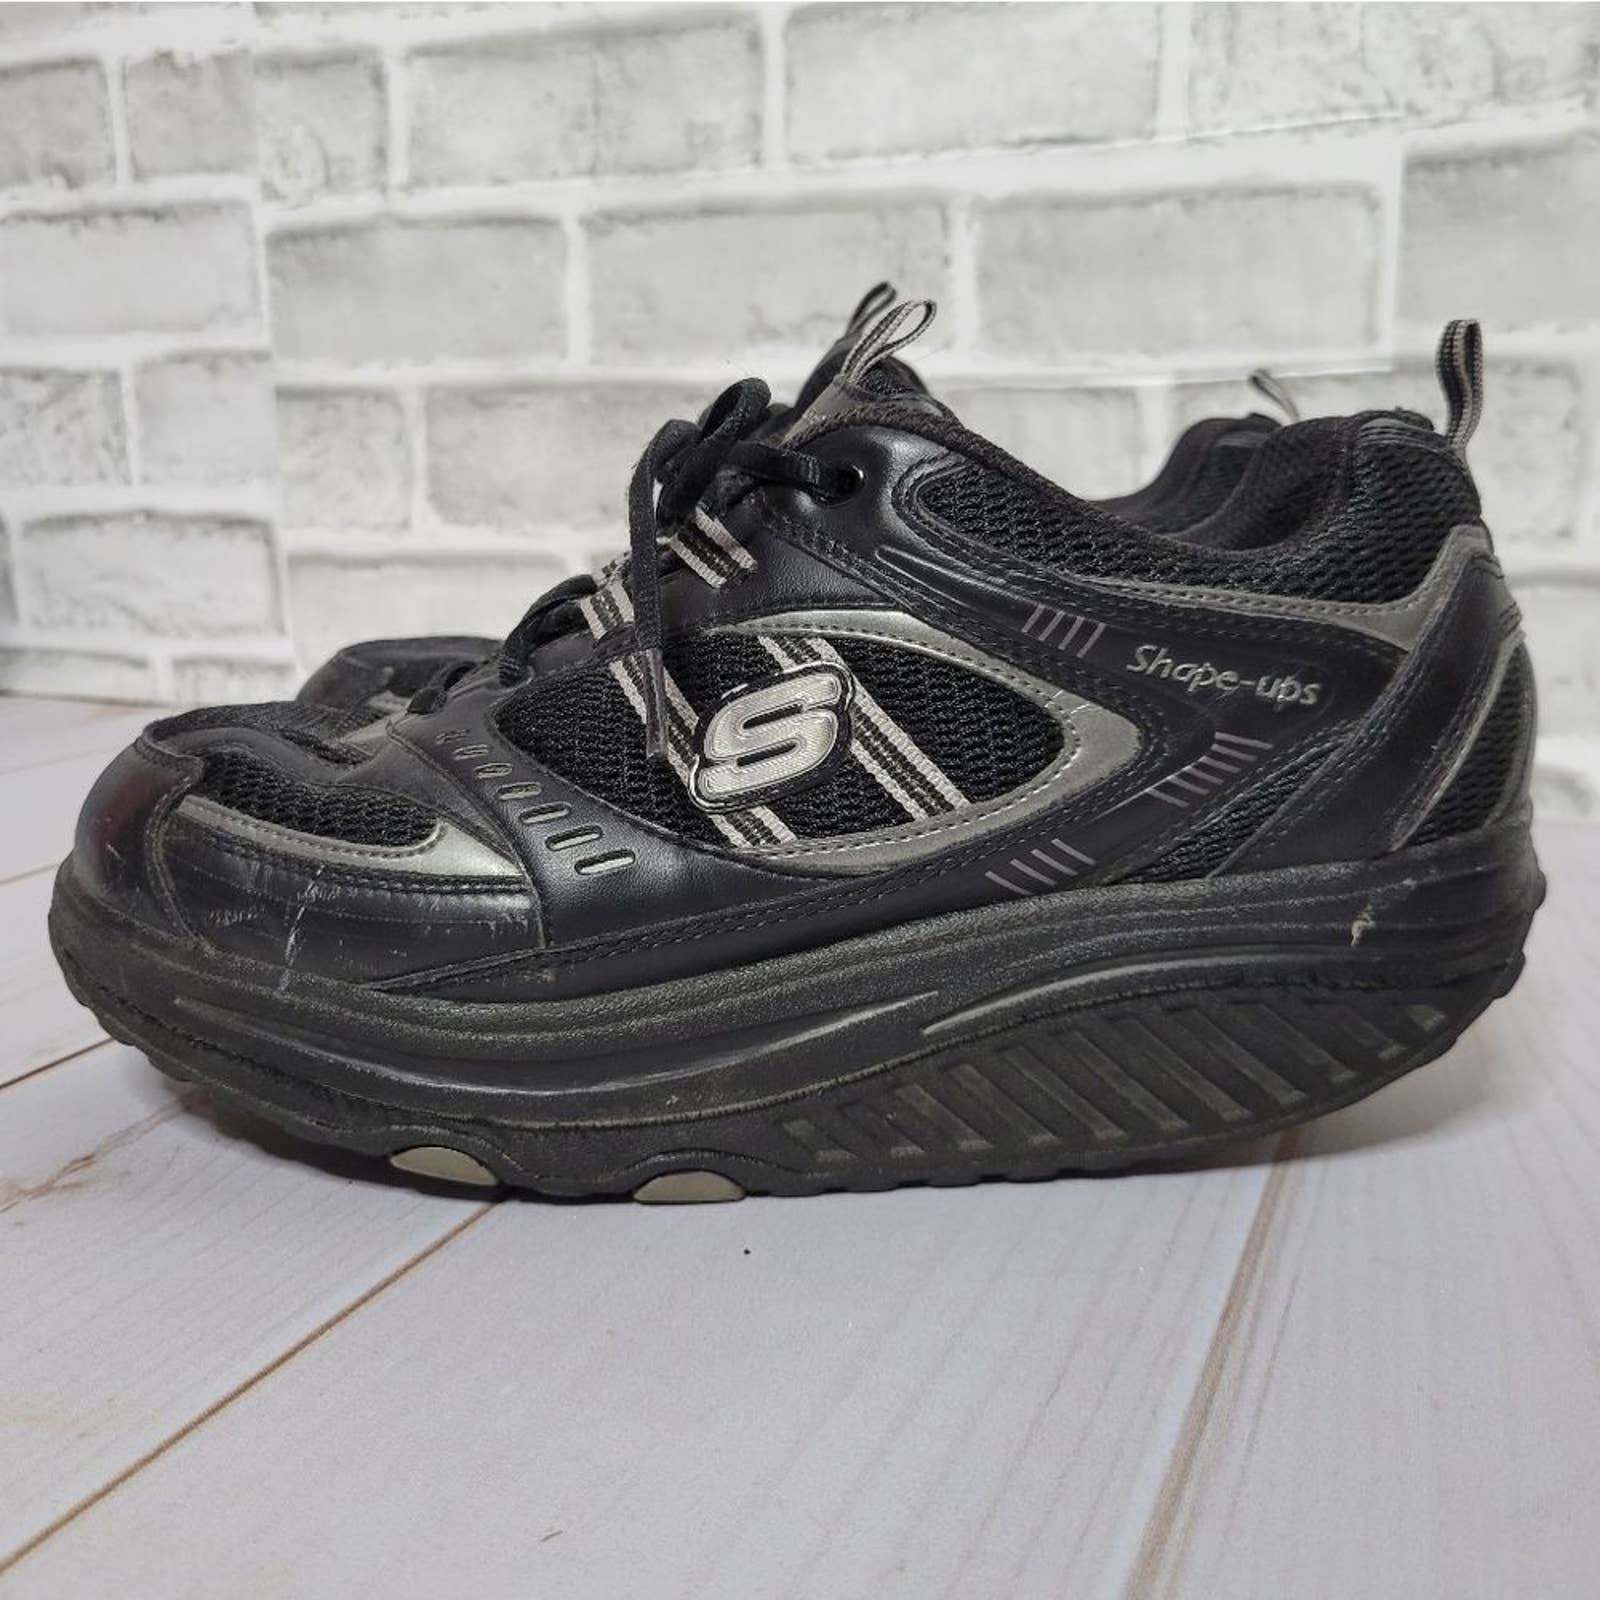 convertible Discreto Susurro Vintage Skecher Black with Silver Shape Ups by Skechers | Shop THRILLING